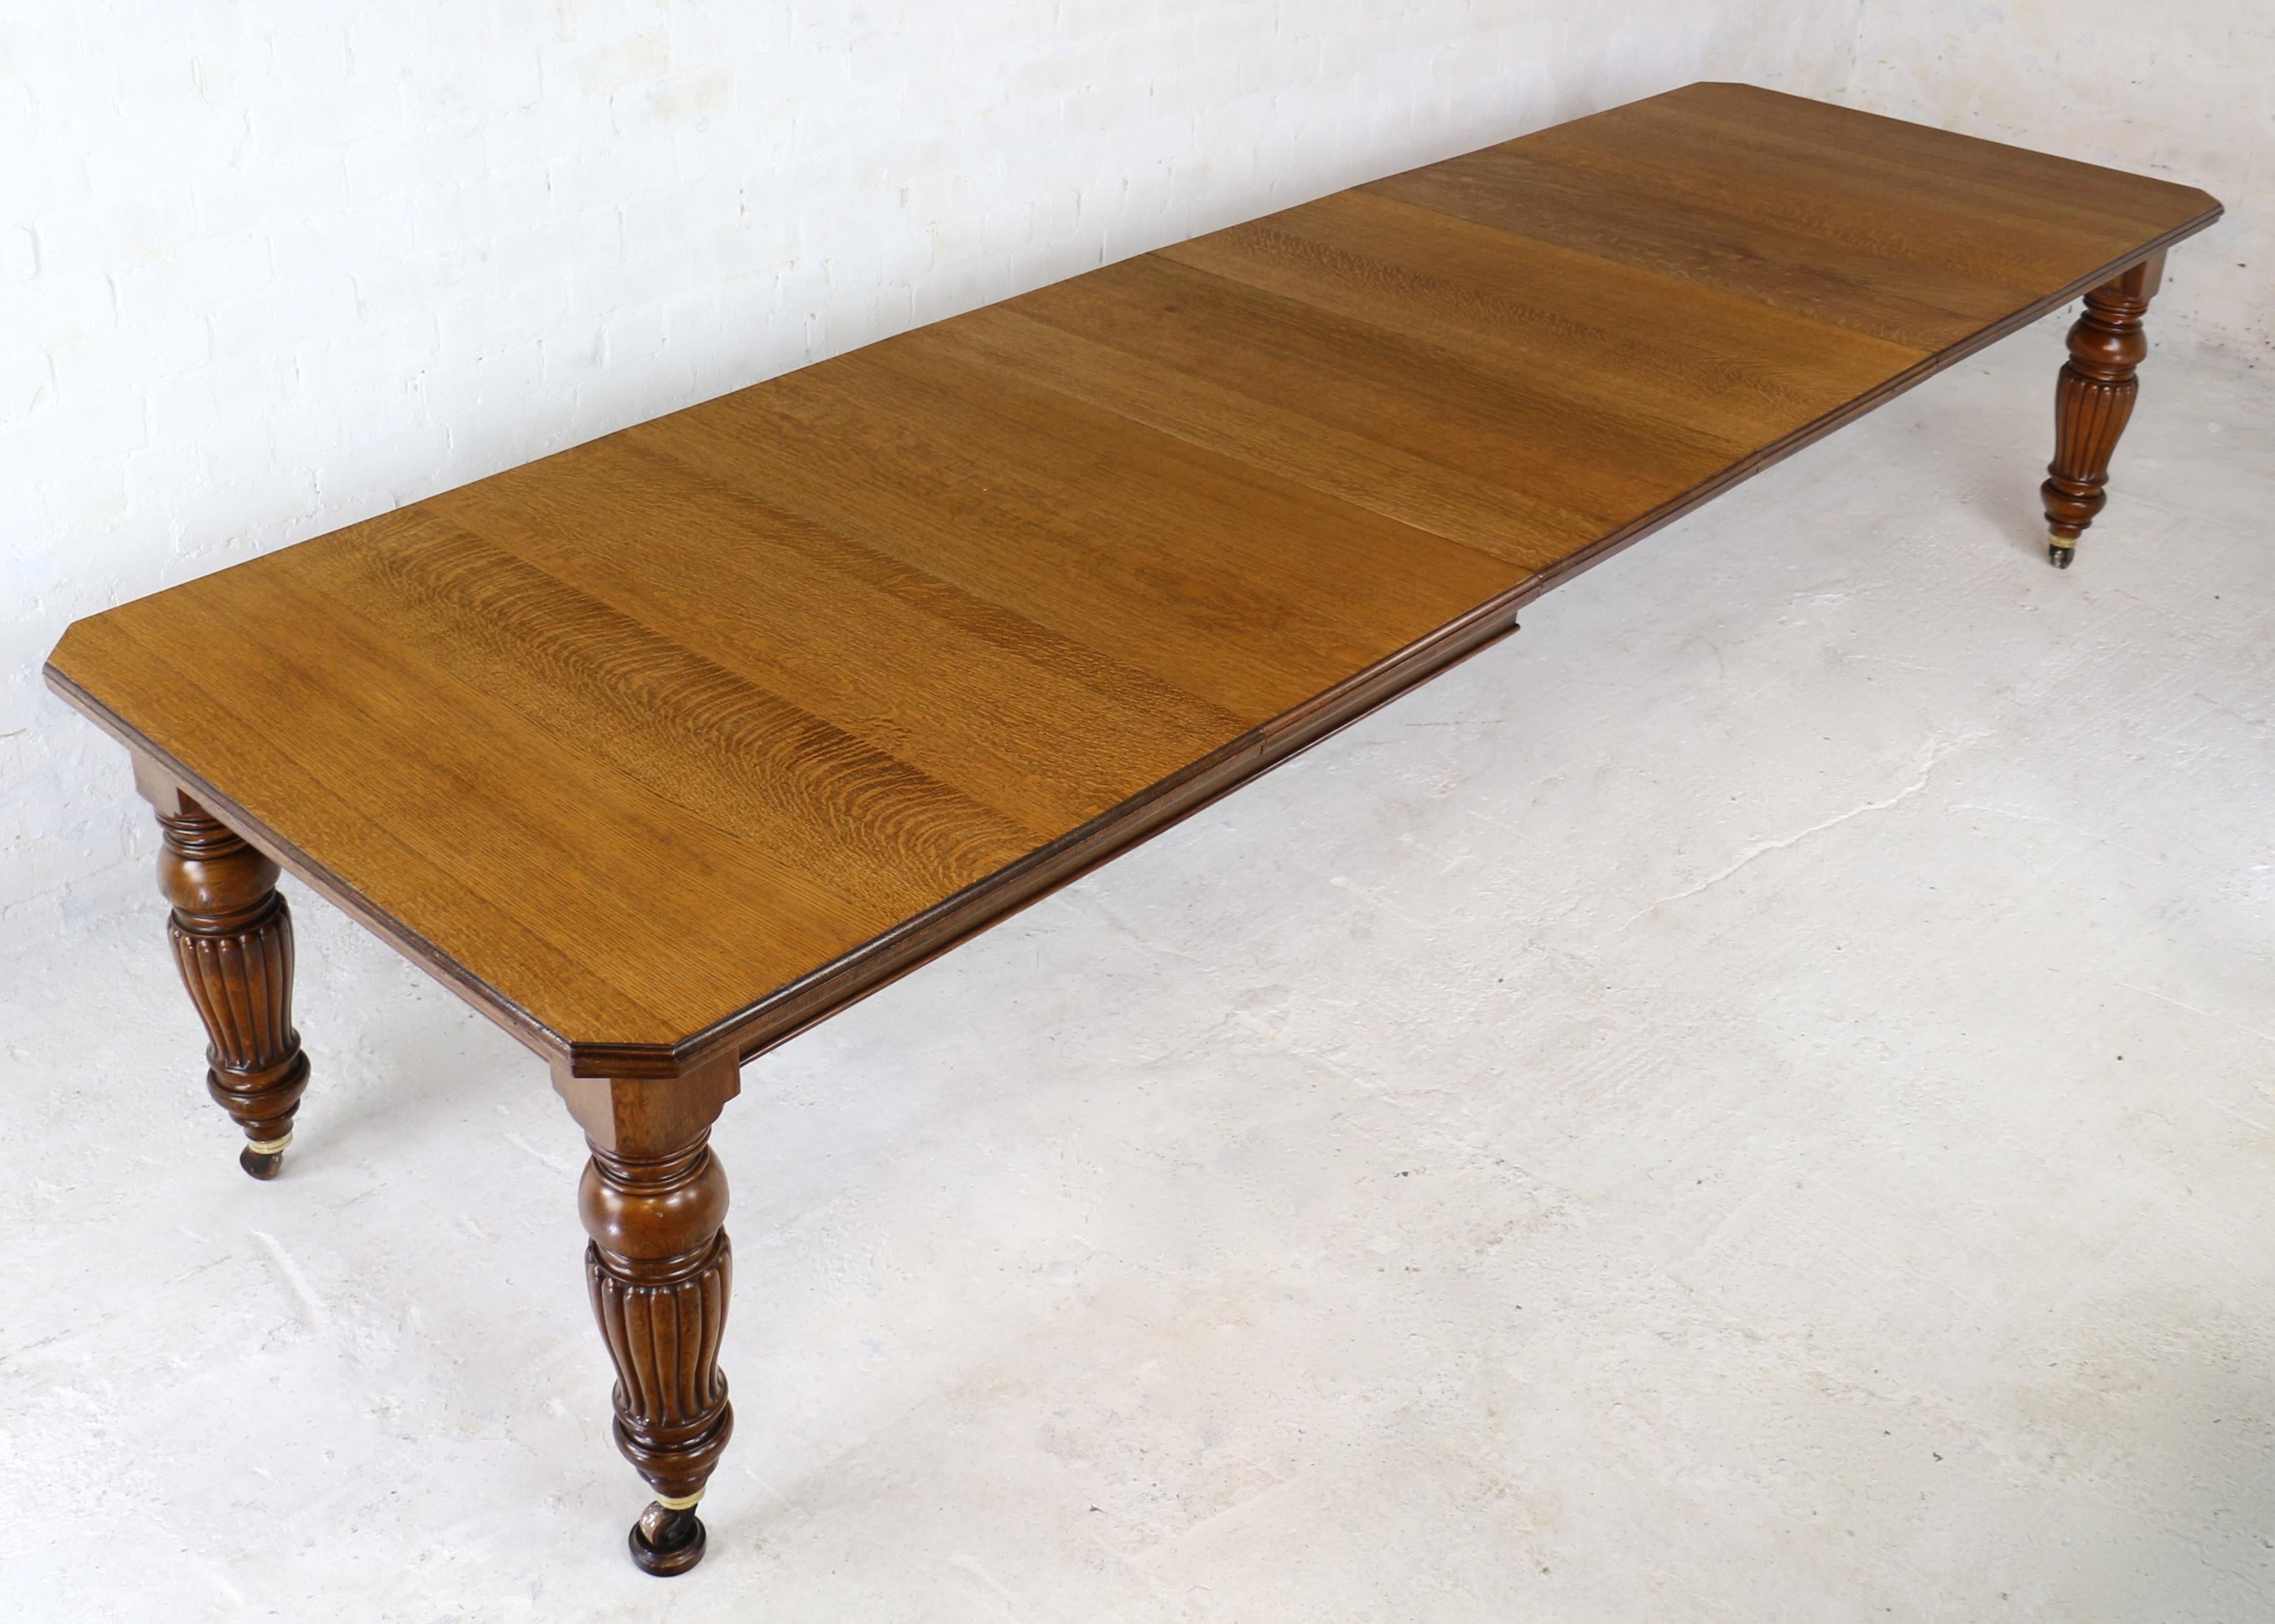 A super late Victorian wind-out extending dining table in quarter-sawn oak and made by Selbat. With a rectangular top with canted or cut corners and an ovolo moulded edge it stands on four turned and reeded tulip shaped legs with brass caps and rare